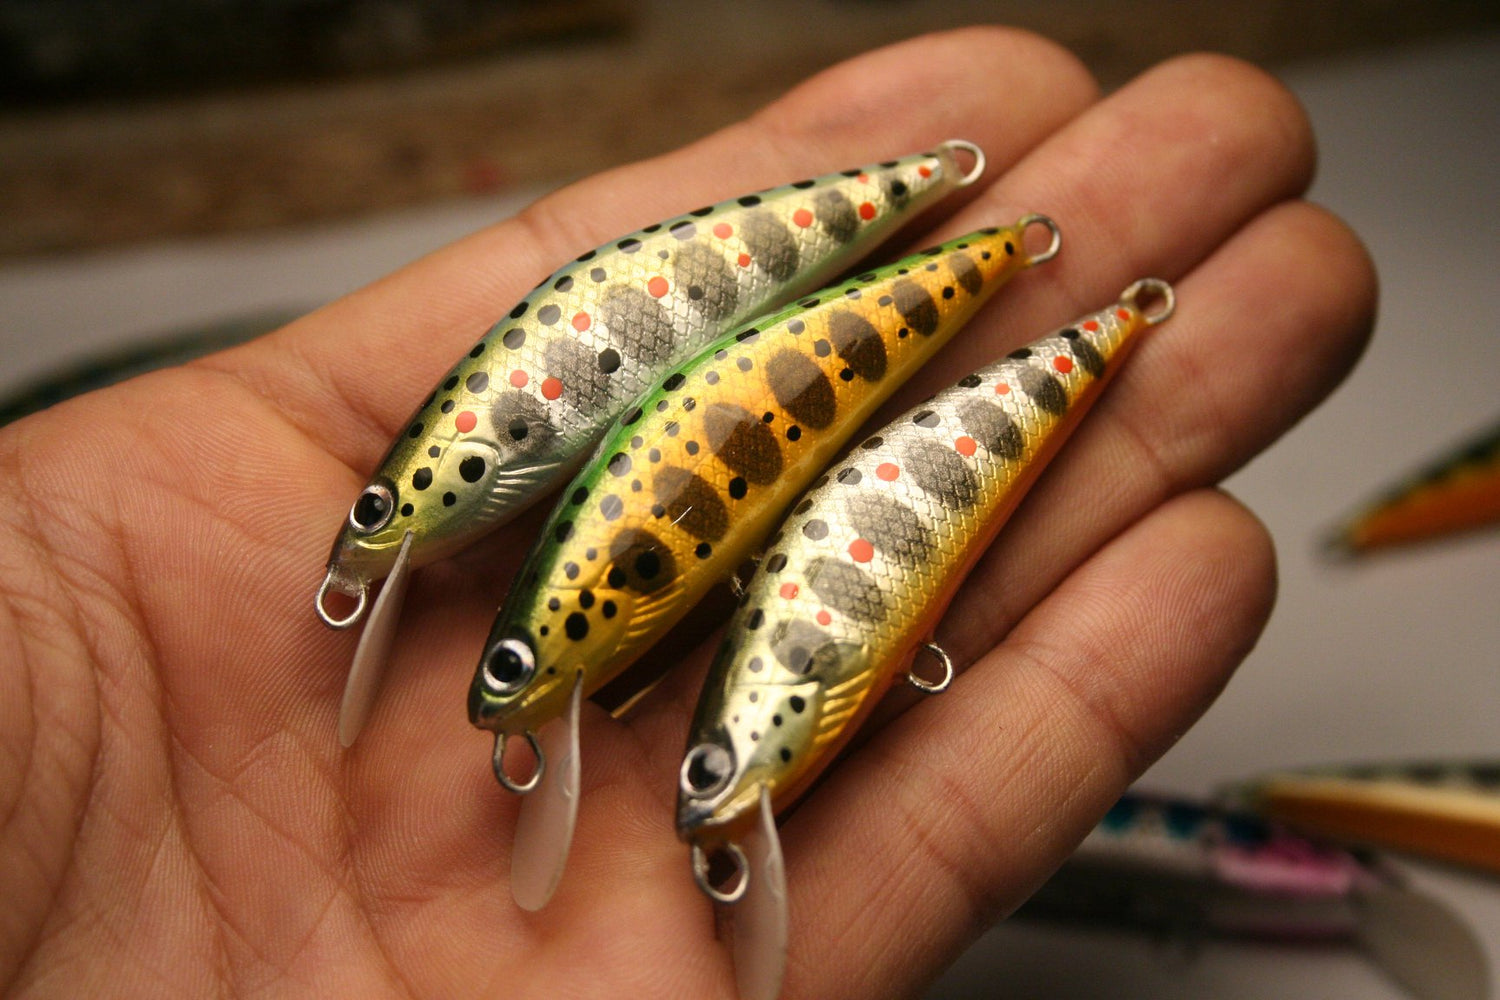 Veles Handcrafted Lures 45mm-3,3gr Sinking. Trout Fishing Lure